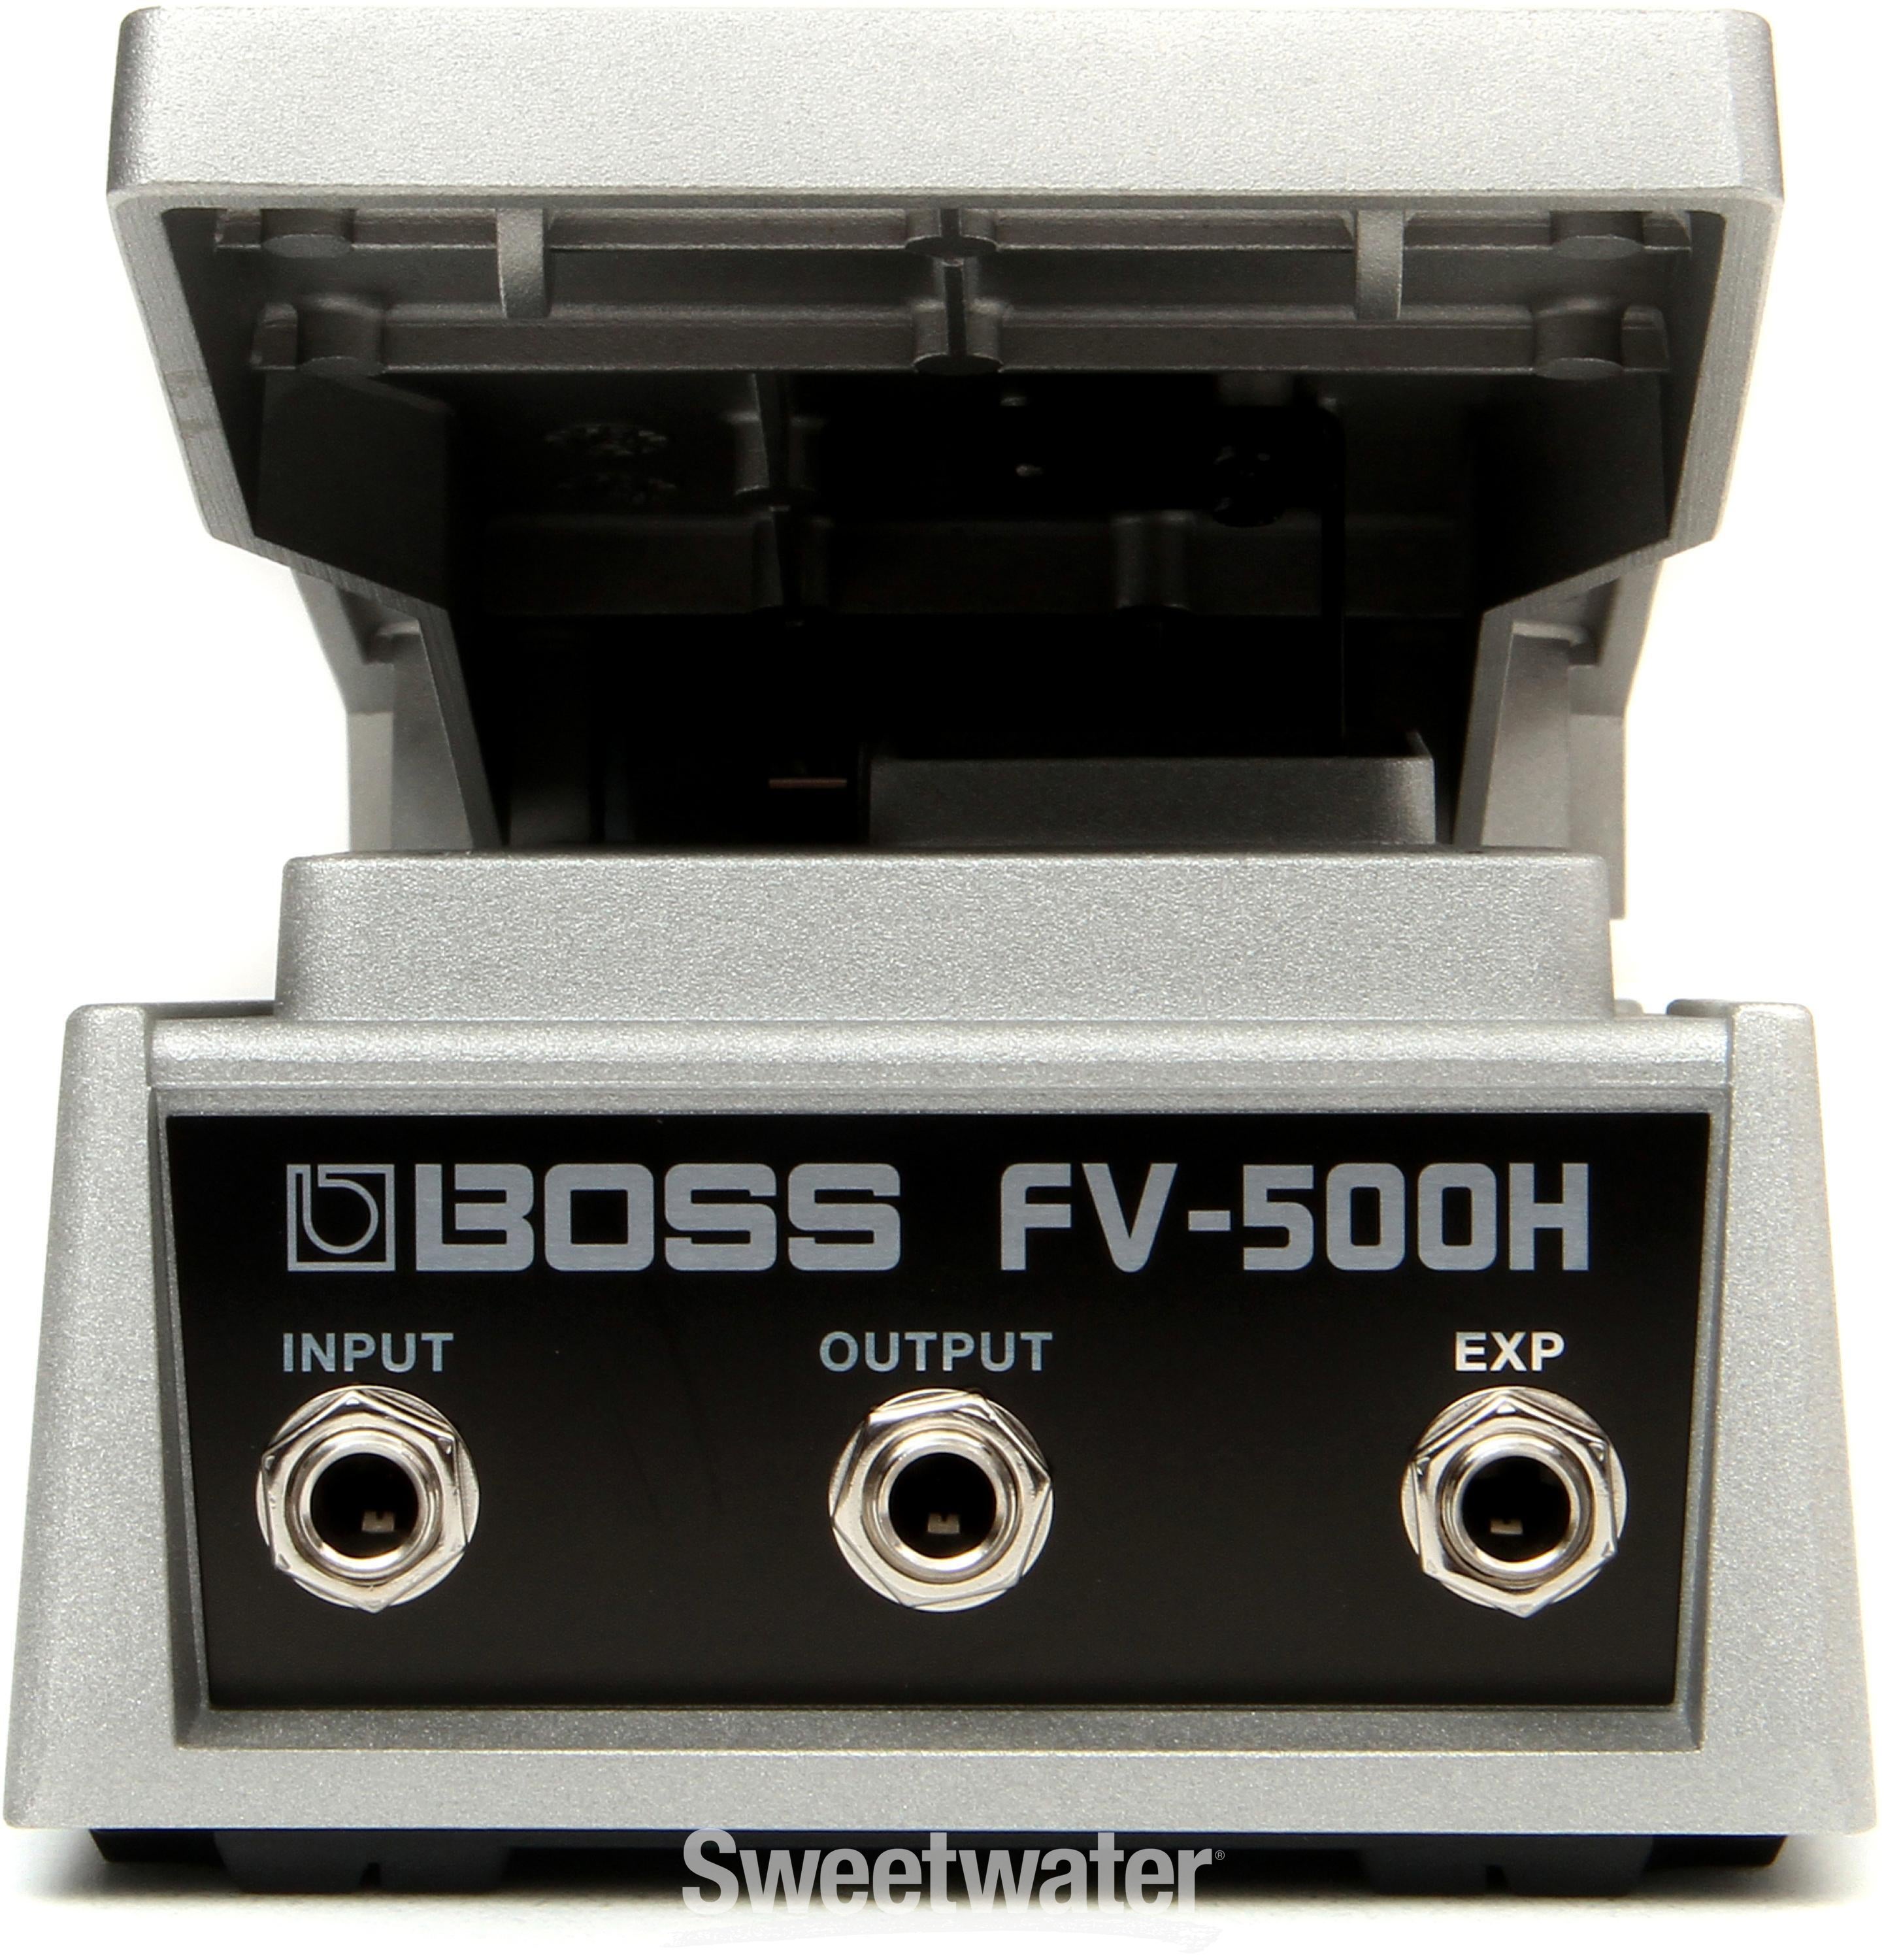 Boss FV-500H Foot Volume Pedal - High Impedance | Sweetwater